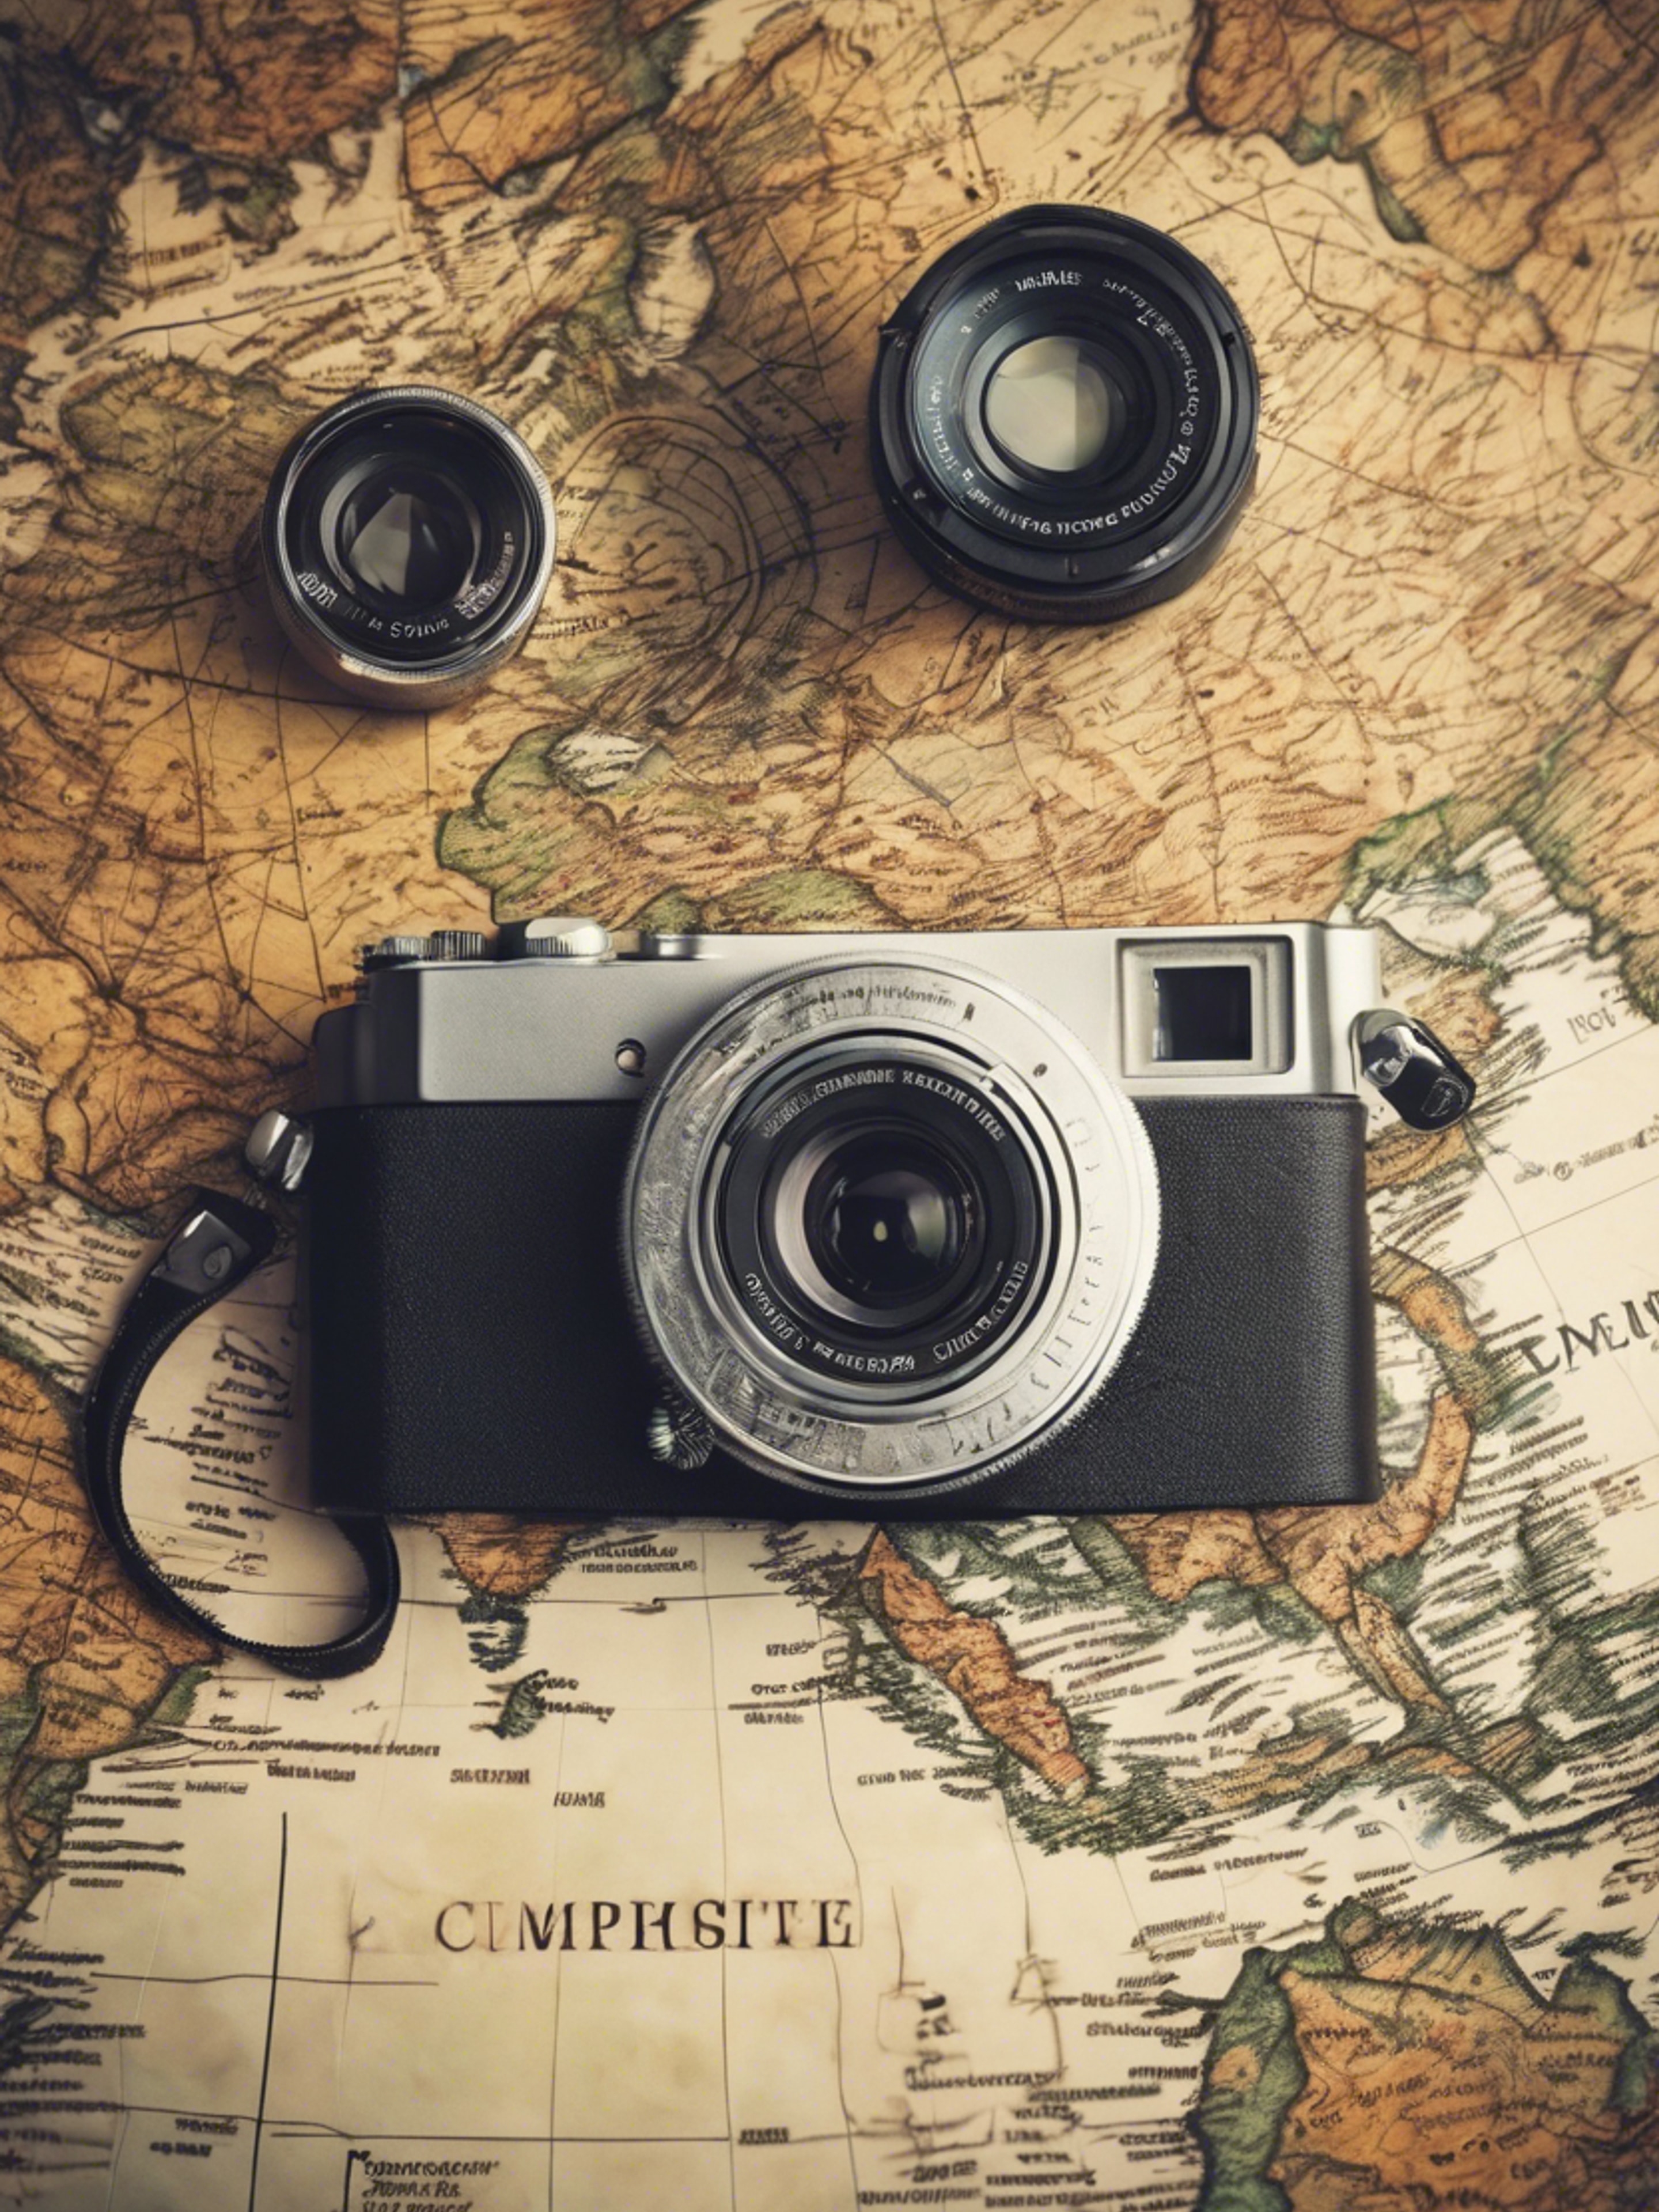 A compact camera with vintage design, placed on a world map to convey the spirit of travel. Kertas dinding[89e32525bdc346769ef4]